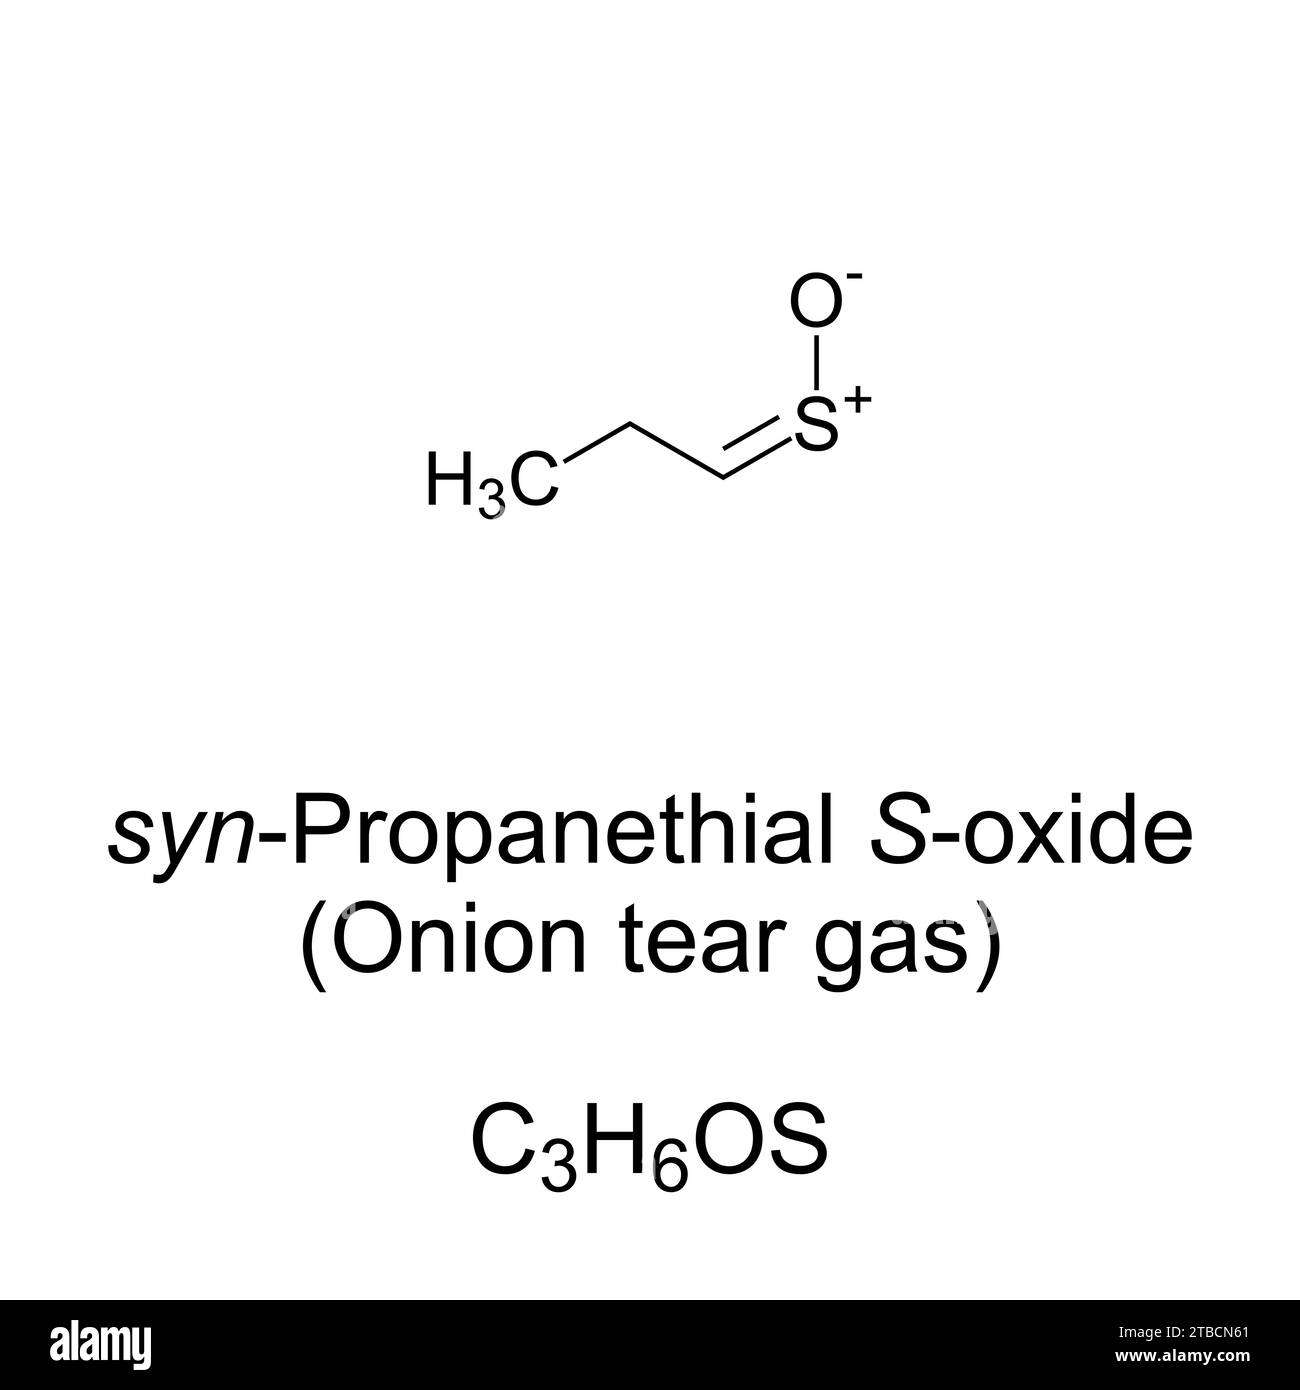 Propanethial S-oxide chemical formula and structure. Organosulfur compound, released from onions as they are sliced. Volatile liquid and tear gas. Stock Photo